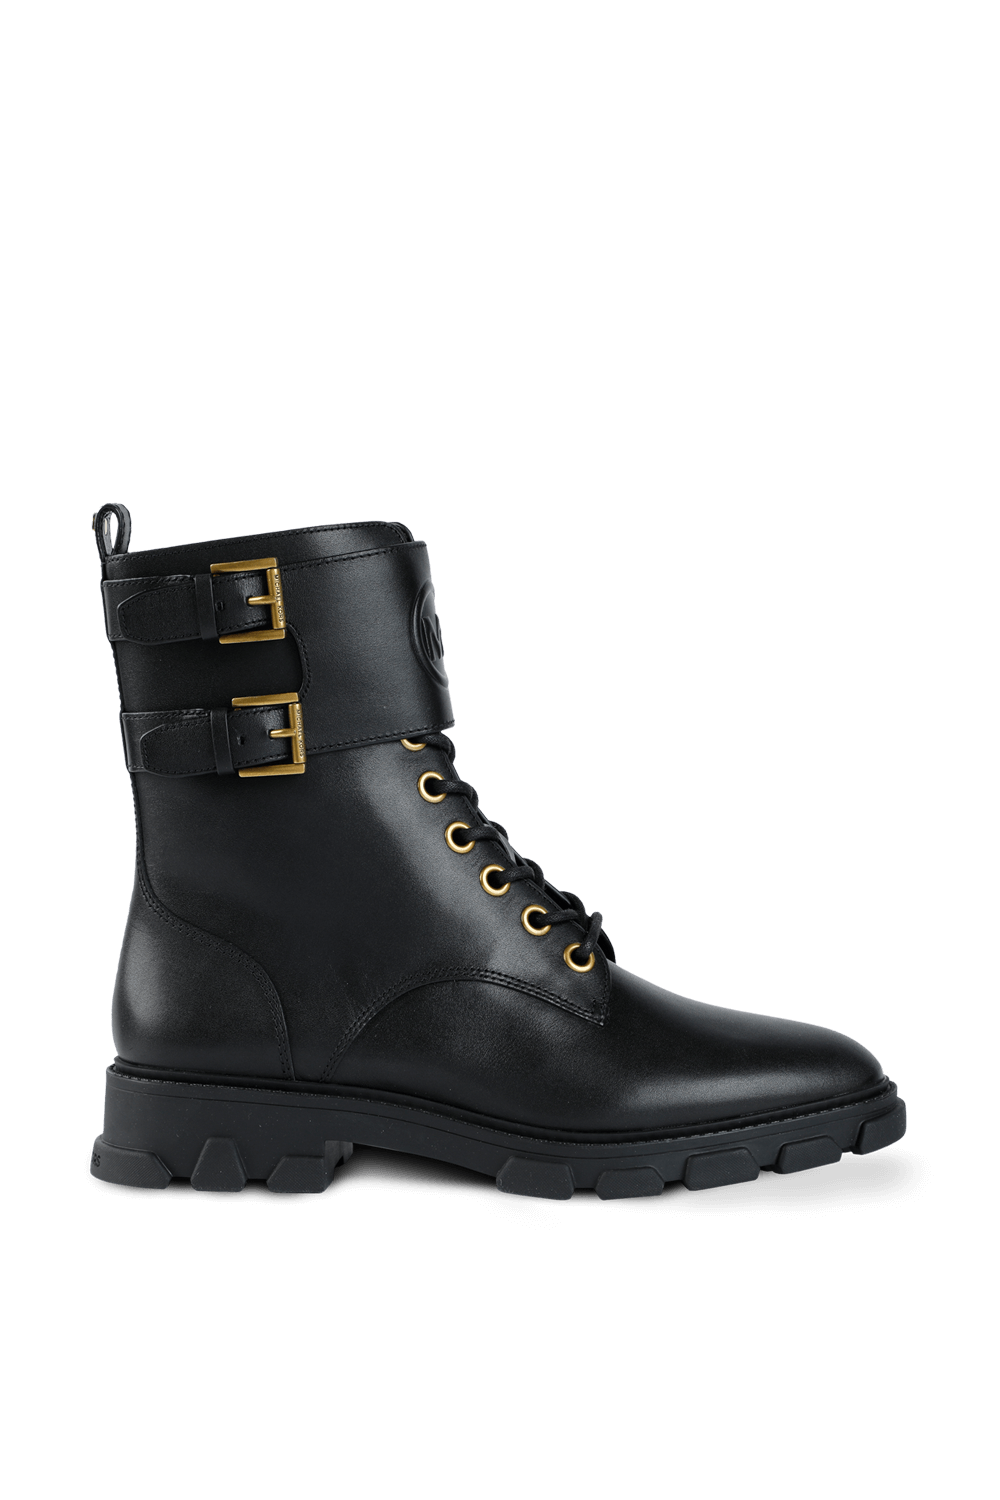 Ridley Leather Combat Boot in Black MICHAEL KORS